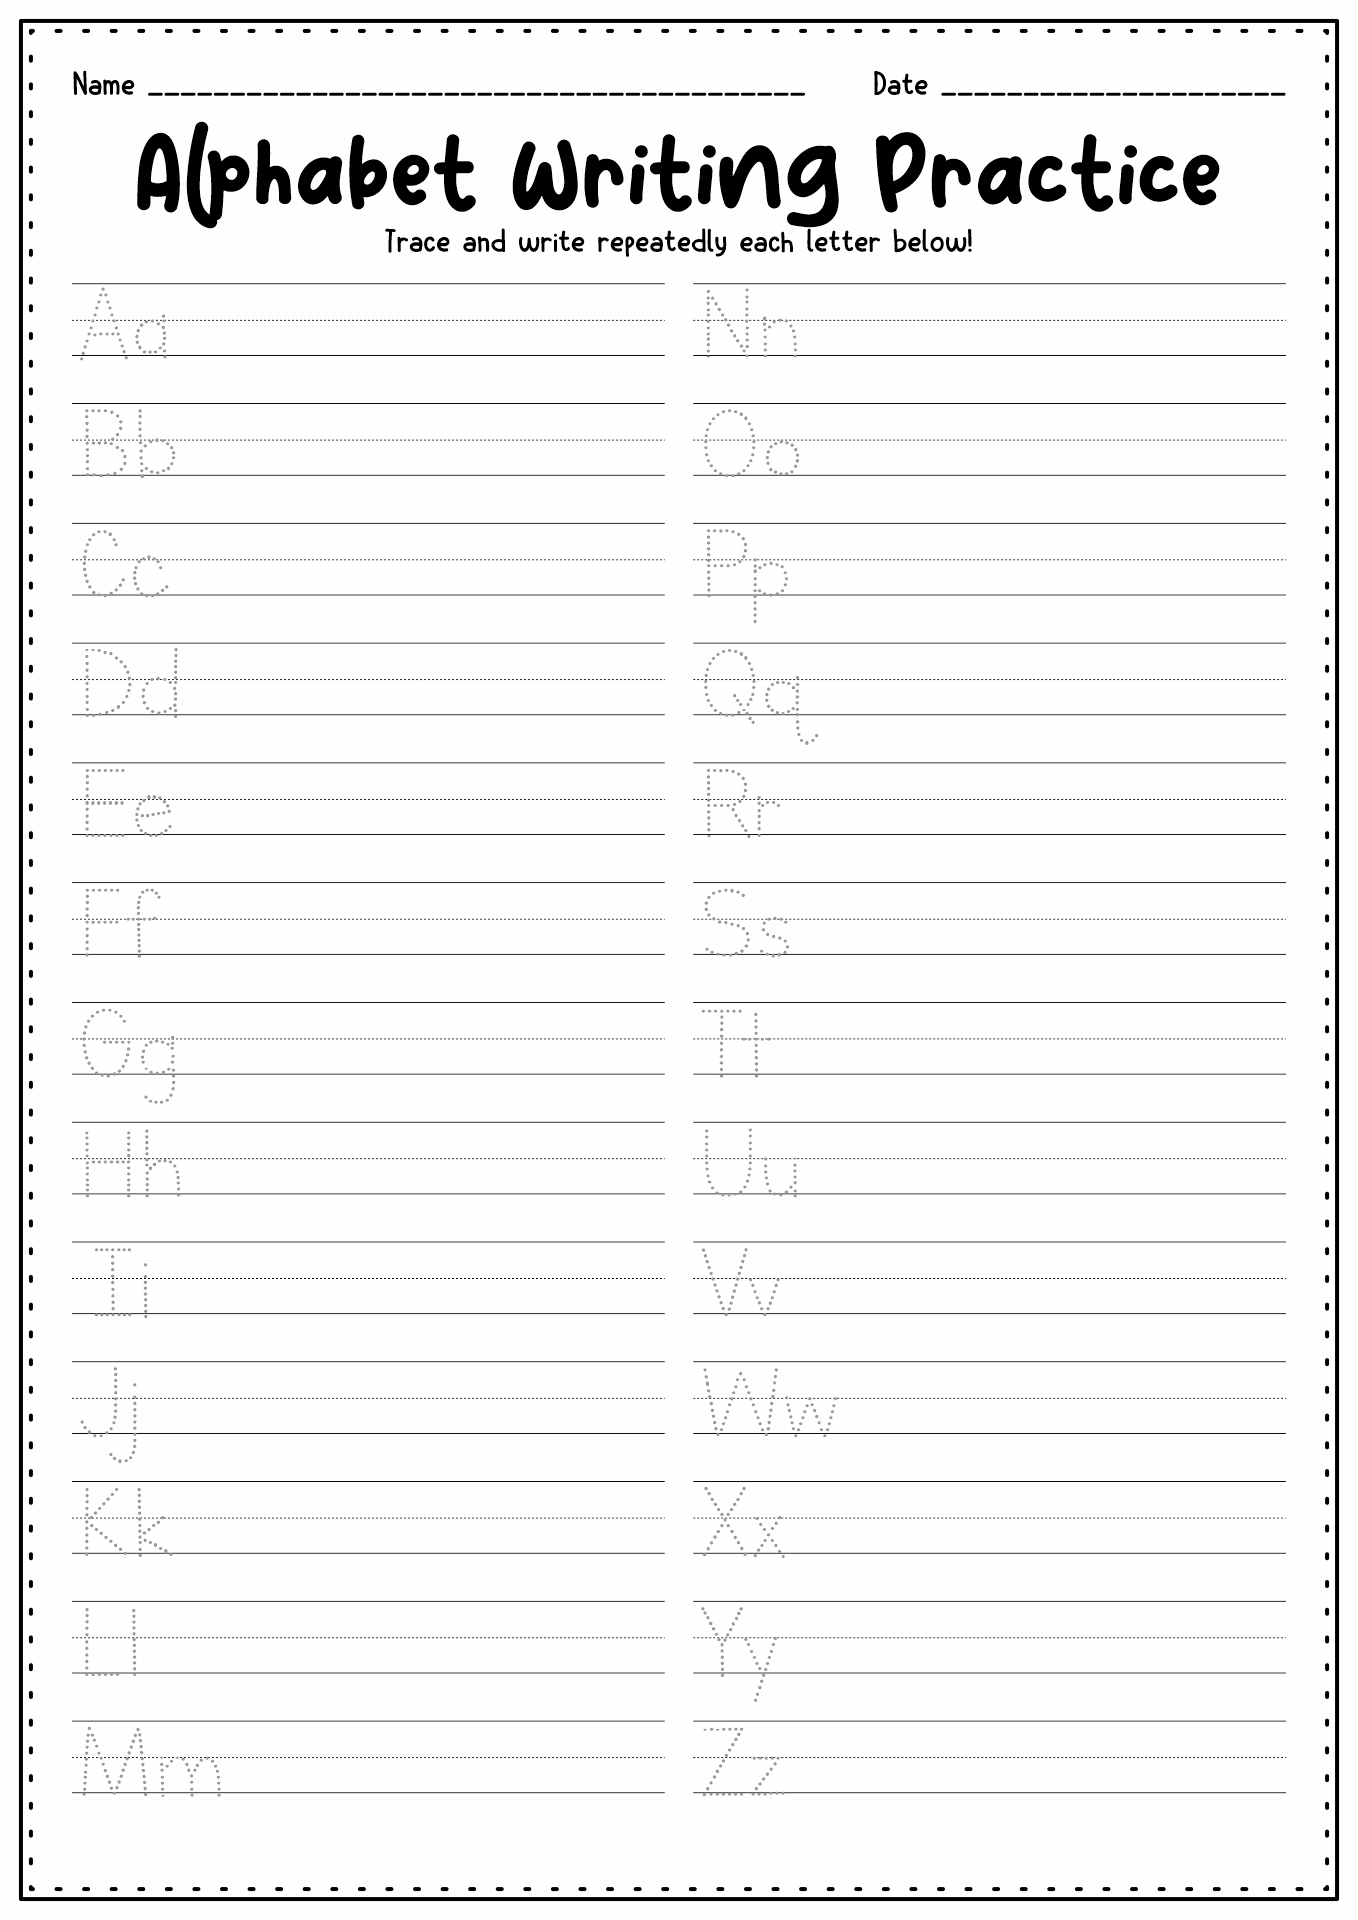 awesome-practice-writing-letters-worksheet-images-worksheet-for-kids